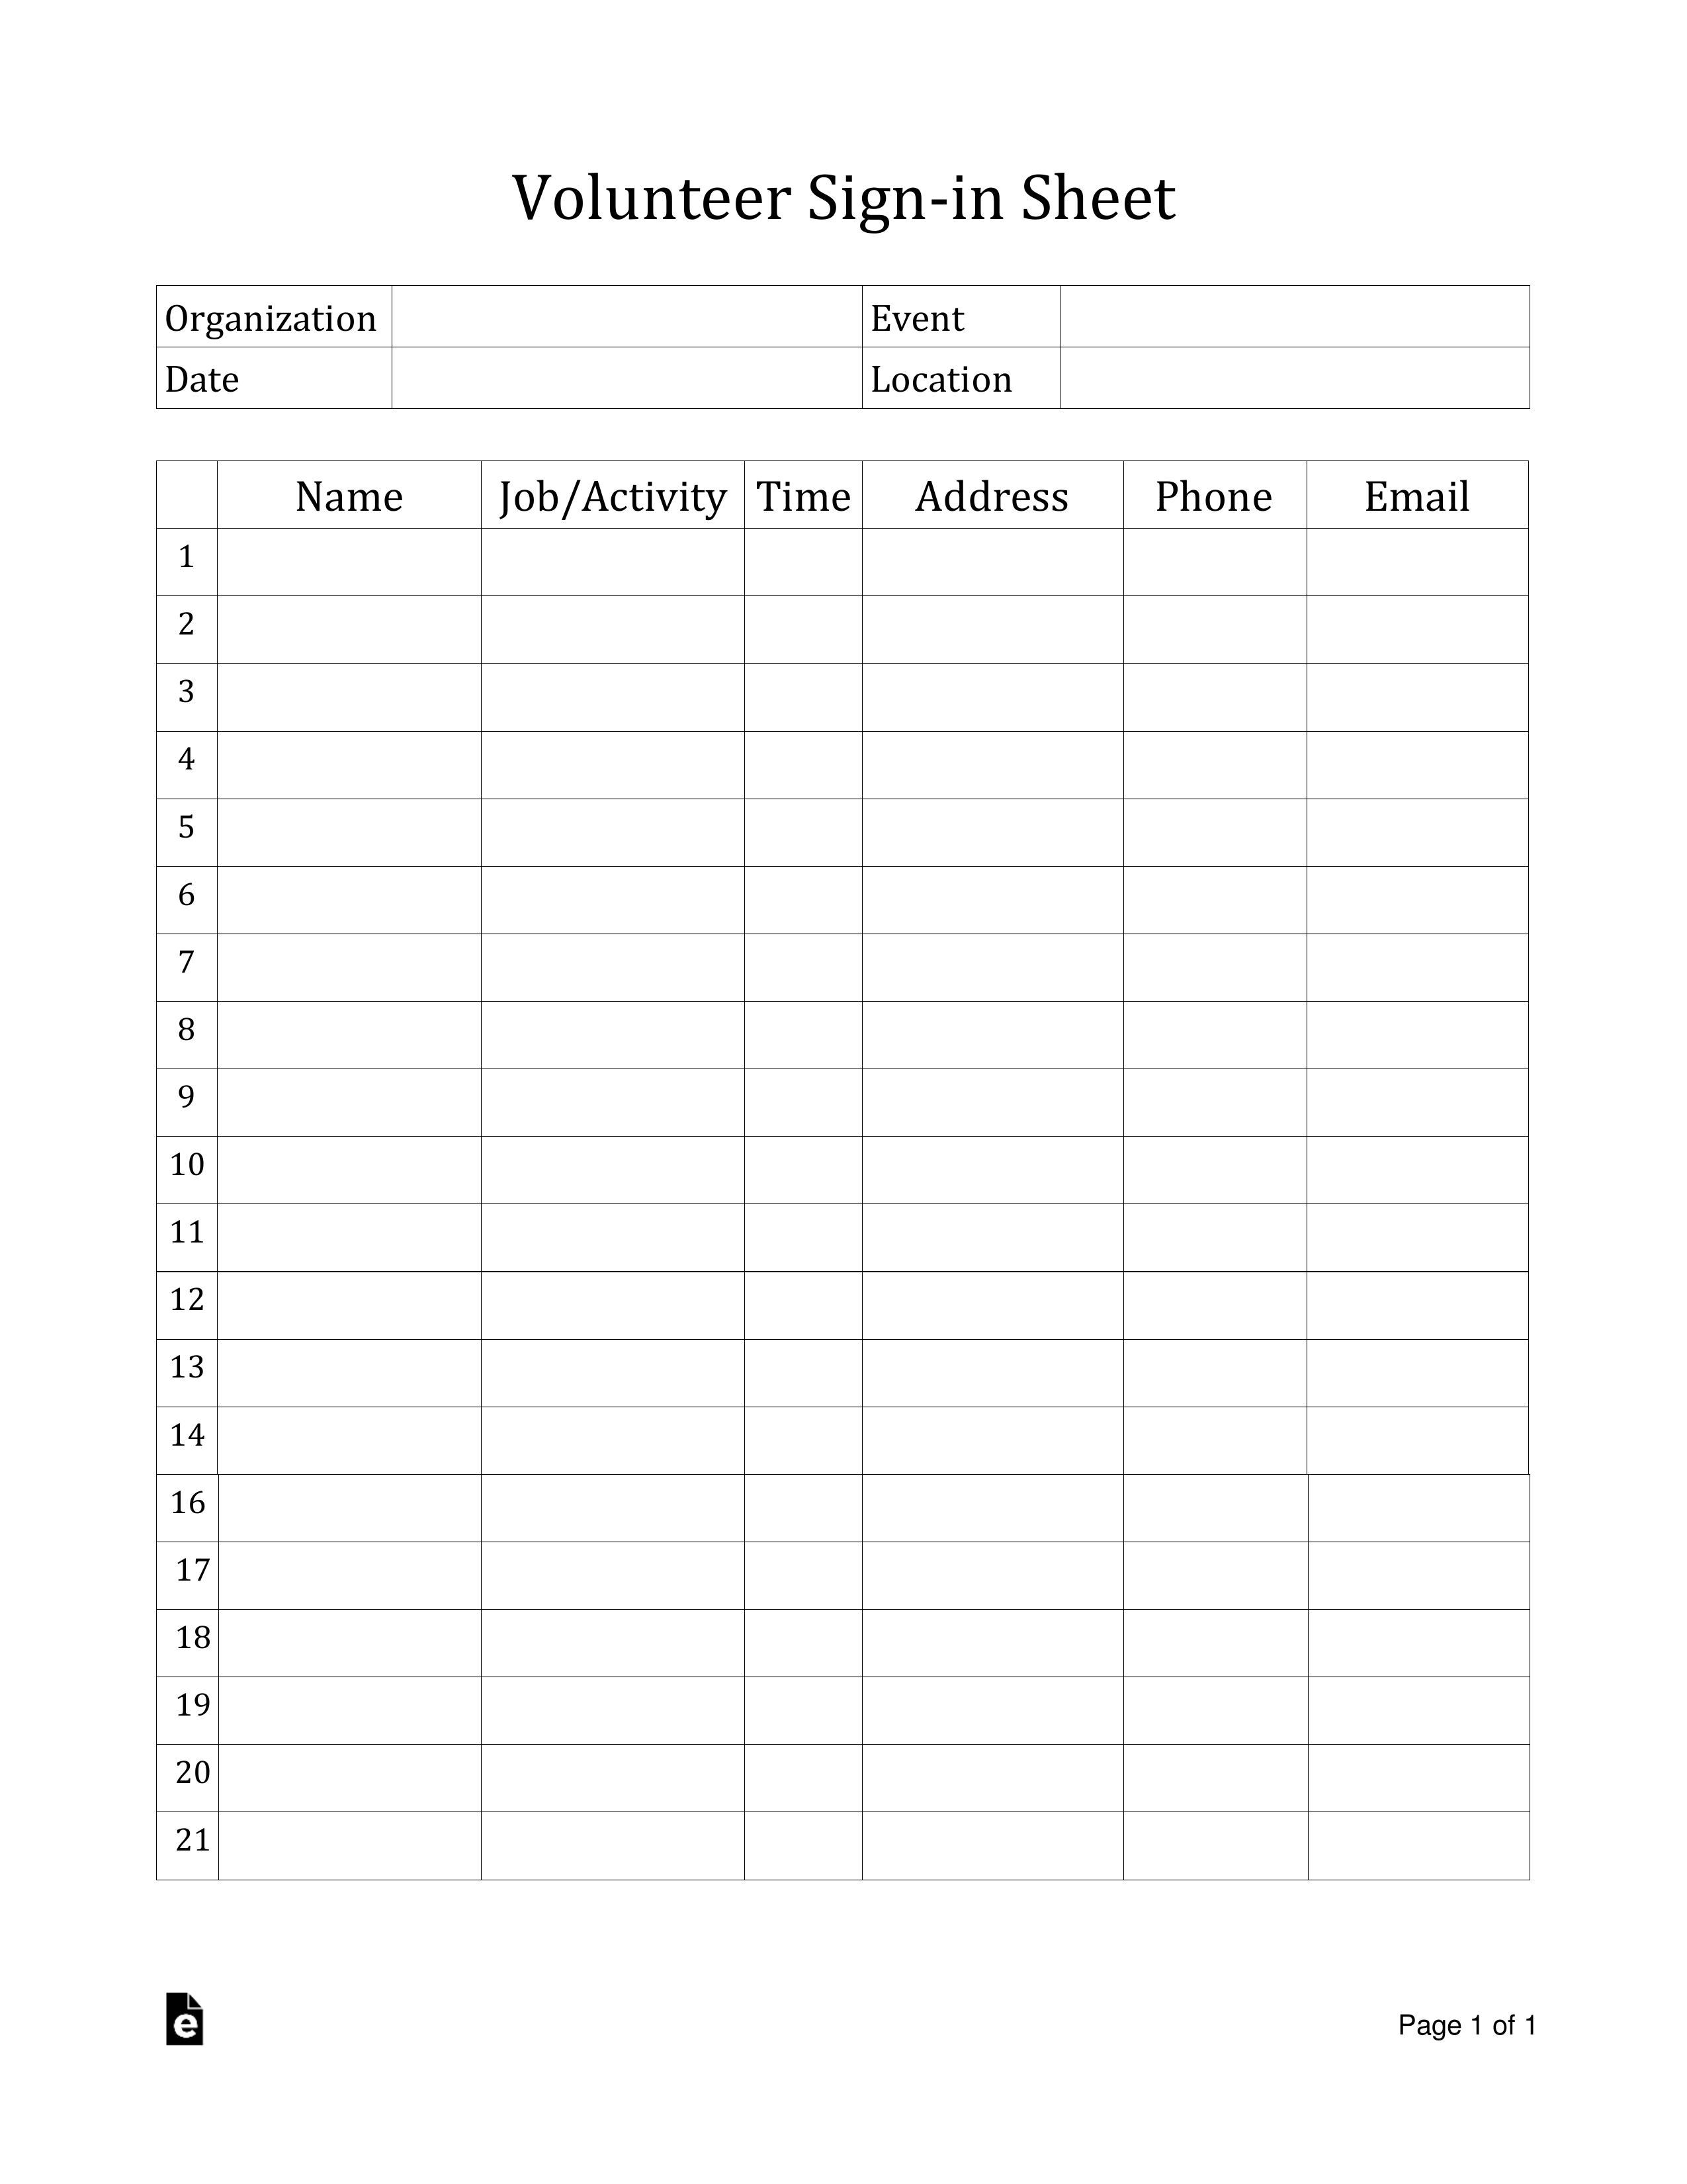 Free Volunteer Sign-in Sheet Template - PDF  Word – eForms Within Community Service Template Word